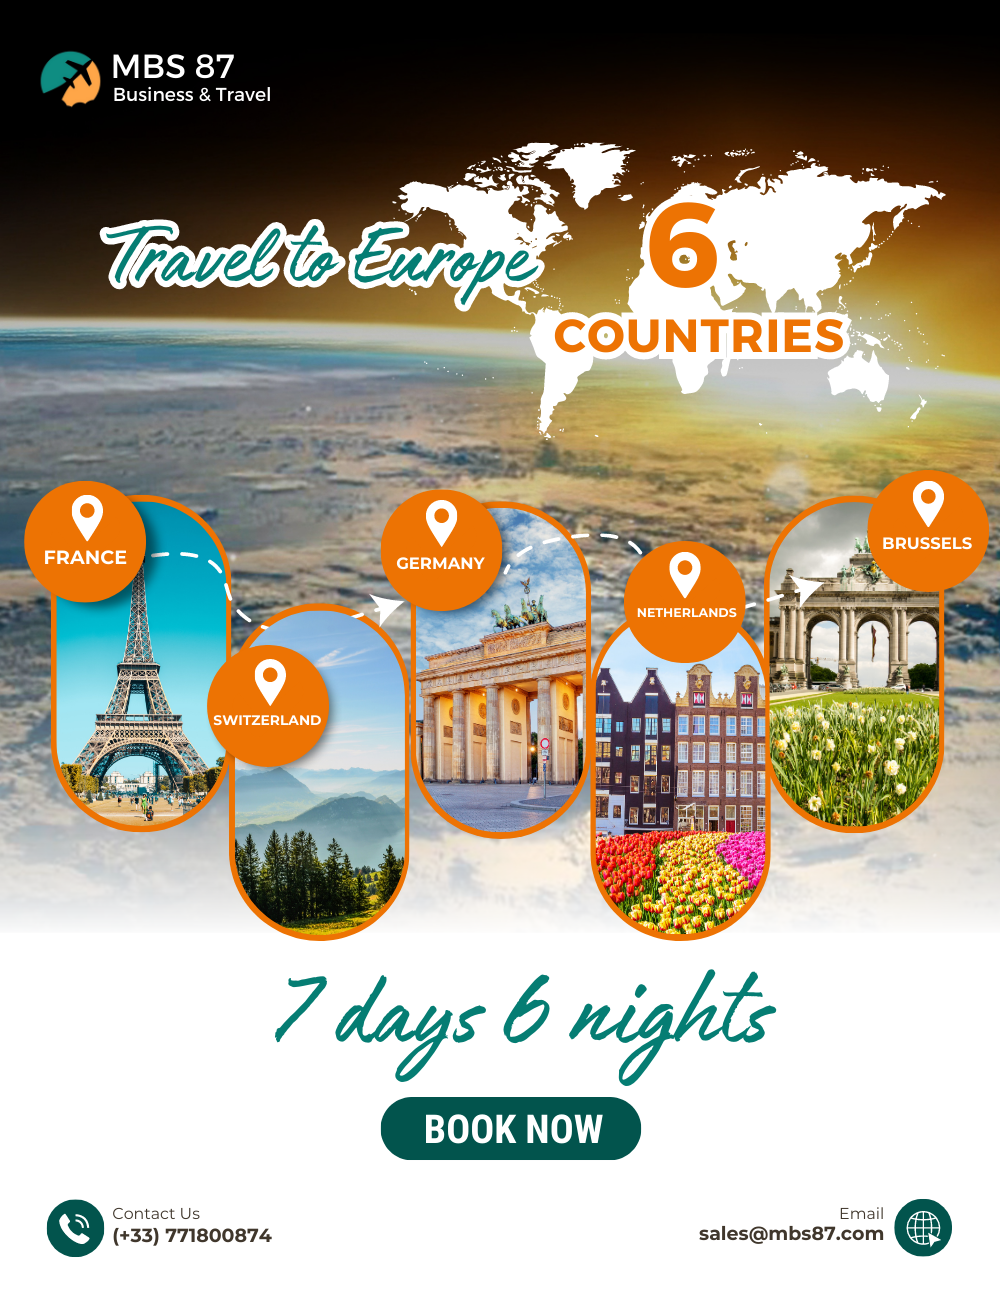 Europe Tour: Around 6 countries France, Switzerland, Germany, Netherlands, Brussels | 7 days 6 nights